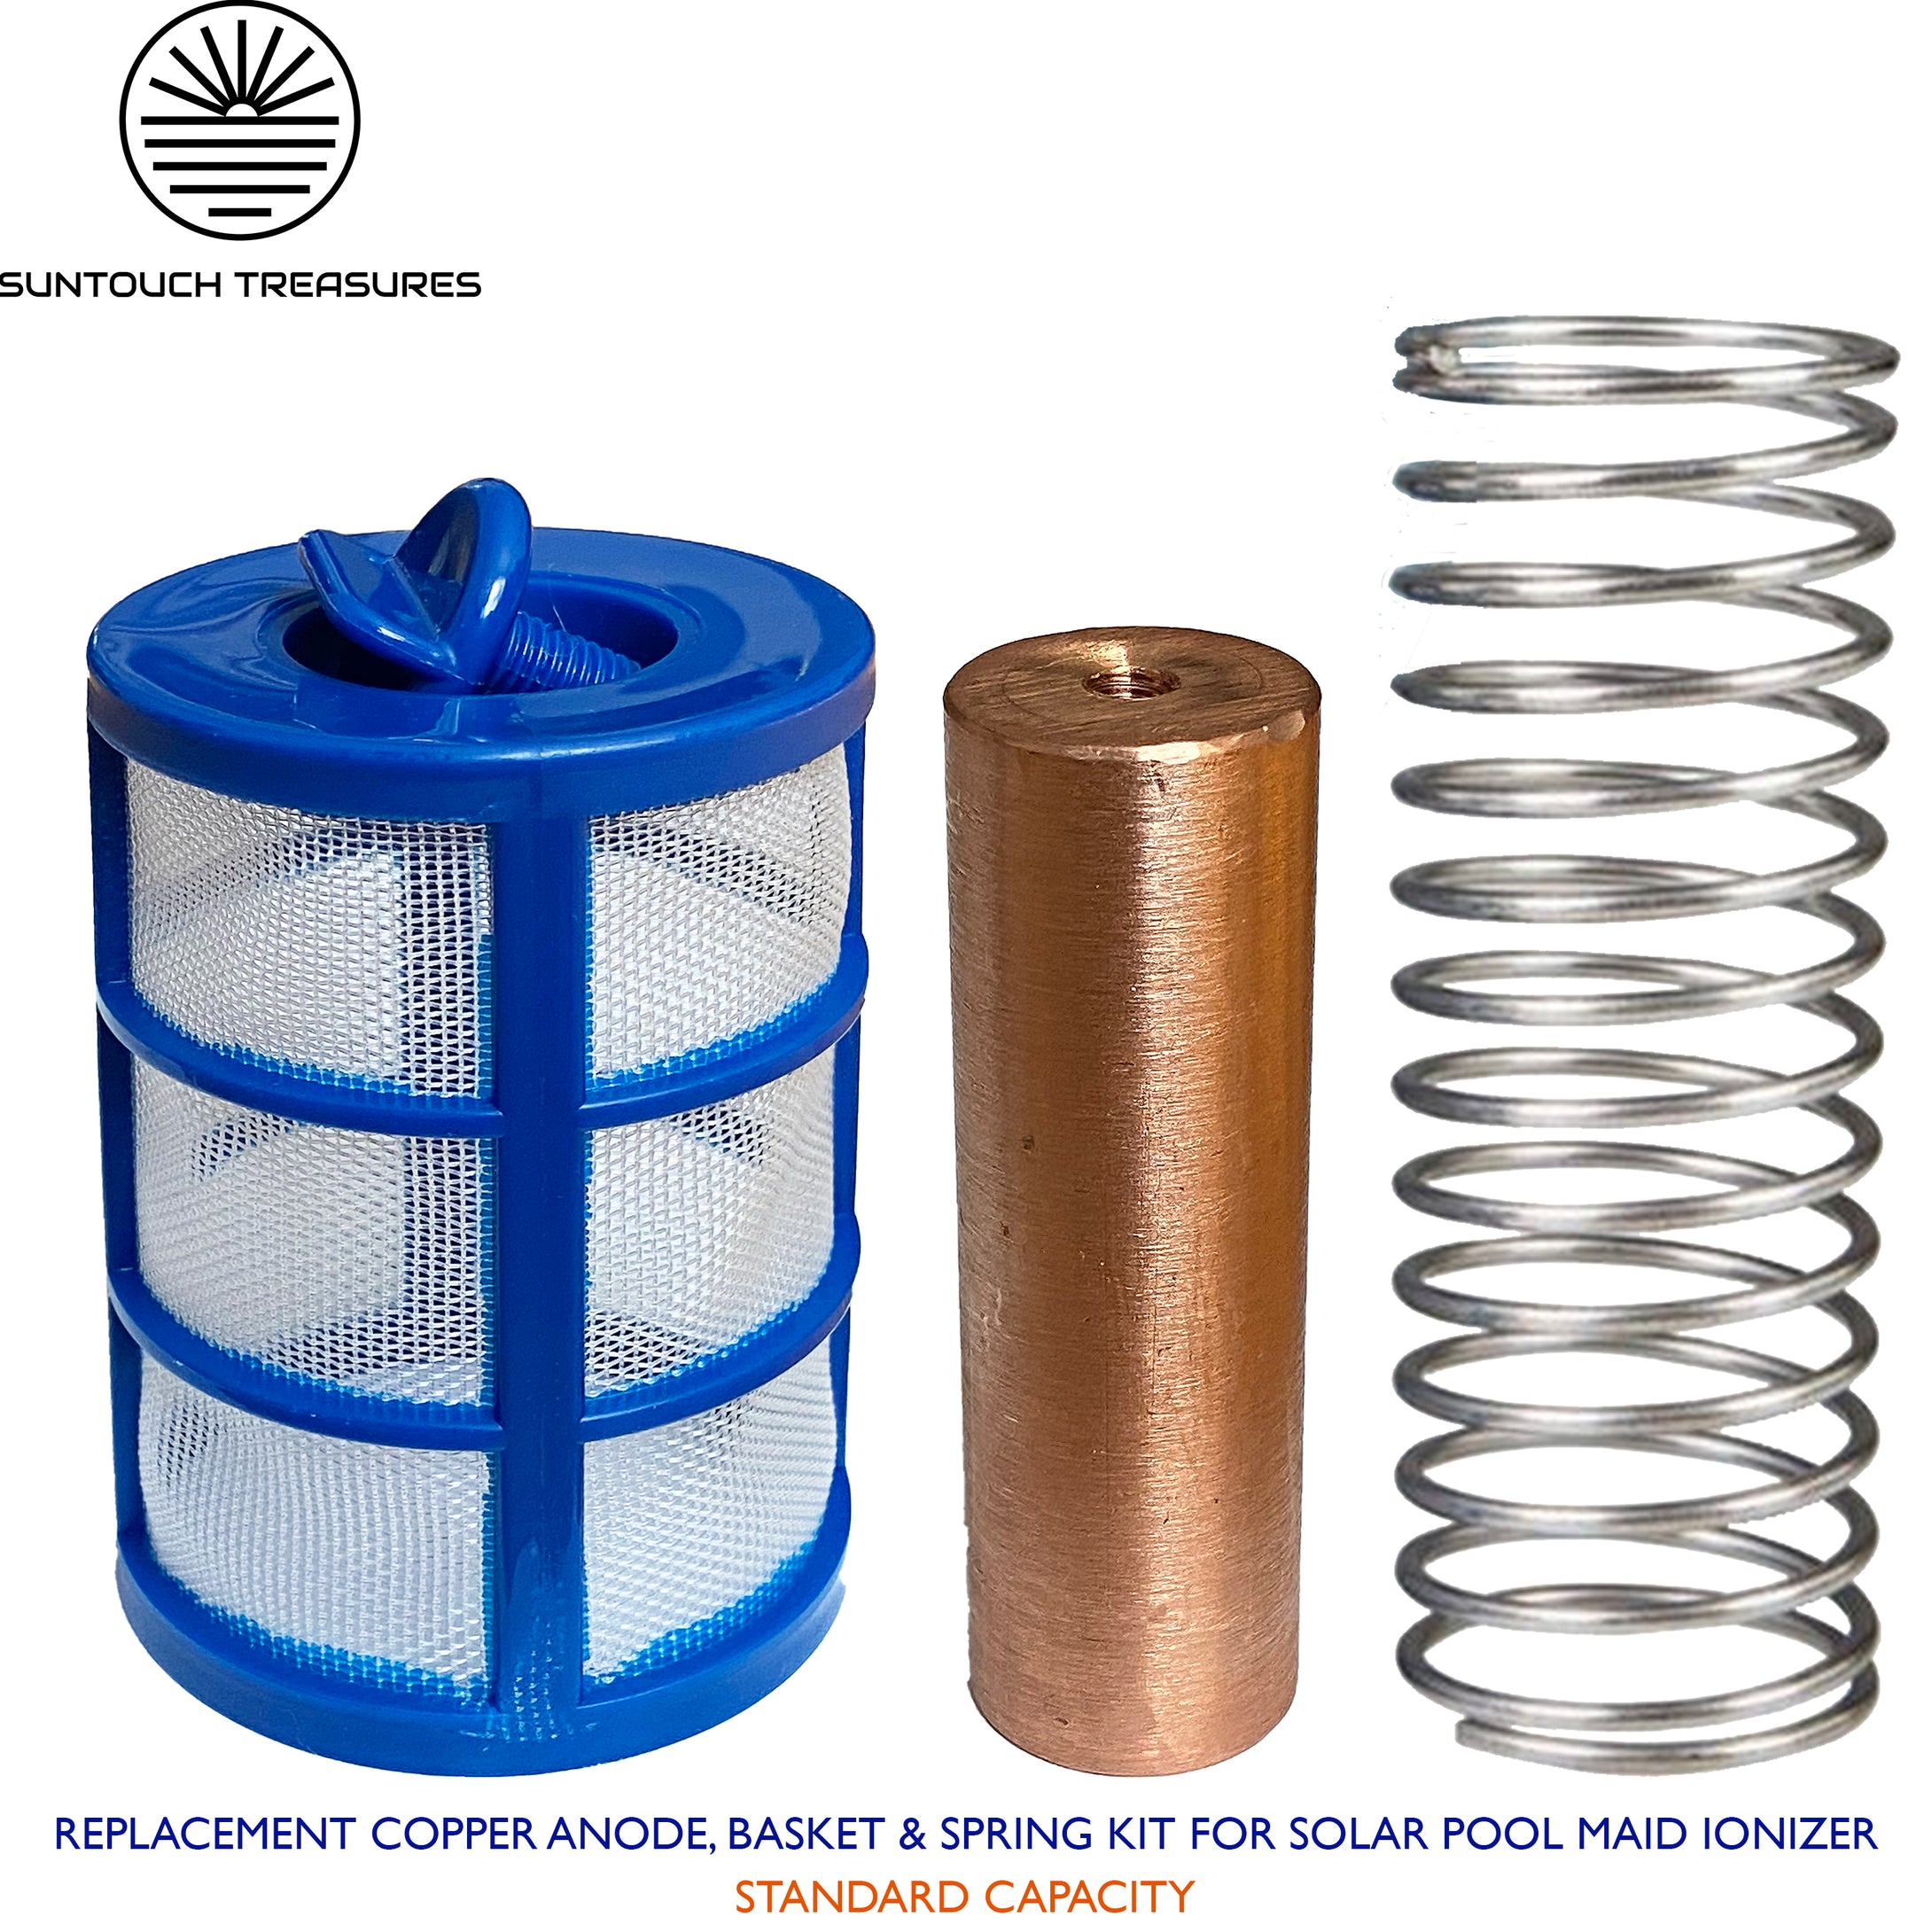 SUNTOUCH TREASURES - Replacement Copper Anode, Basket & Spring Kit for Solar Pool Maid Ionizer (Standard Capacity)